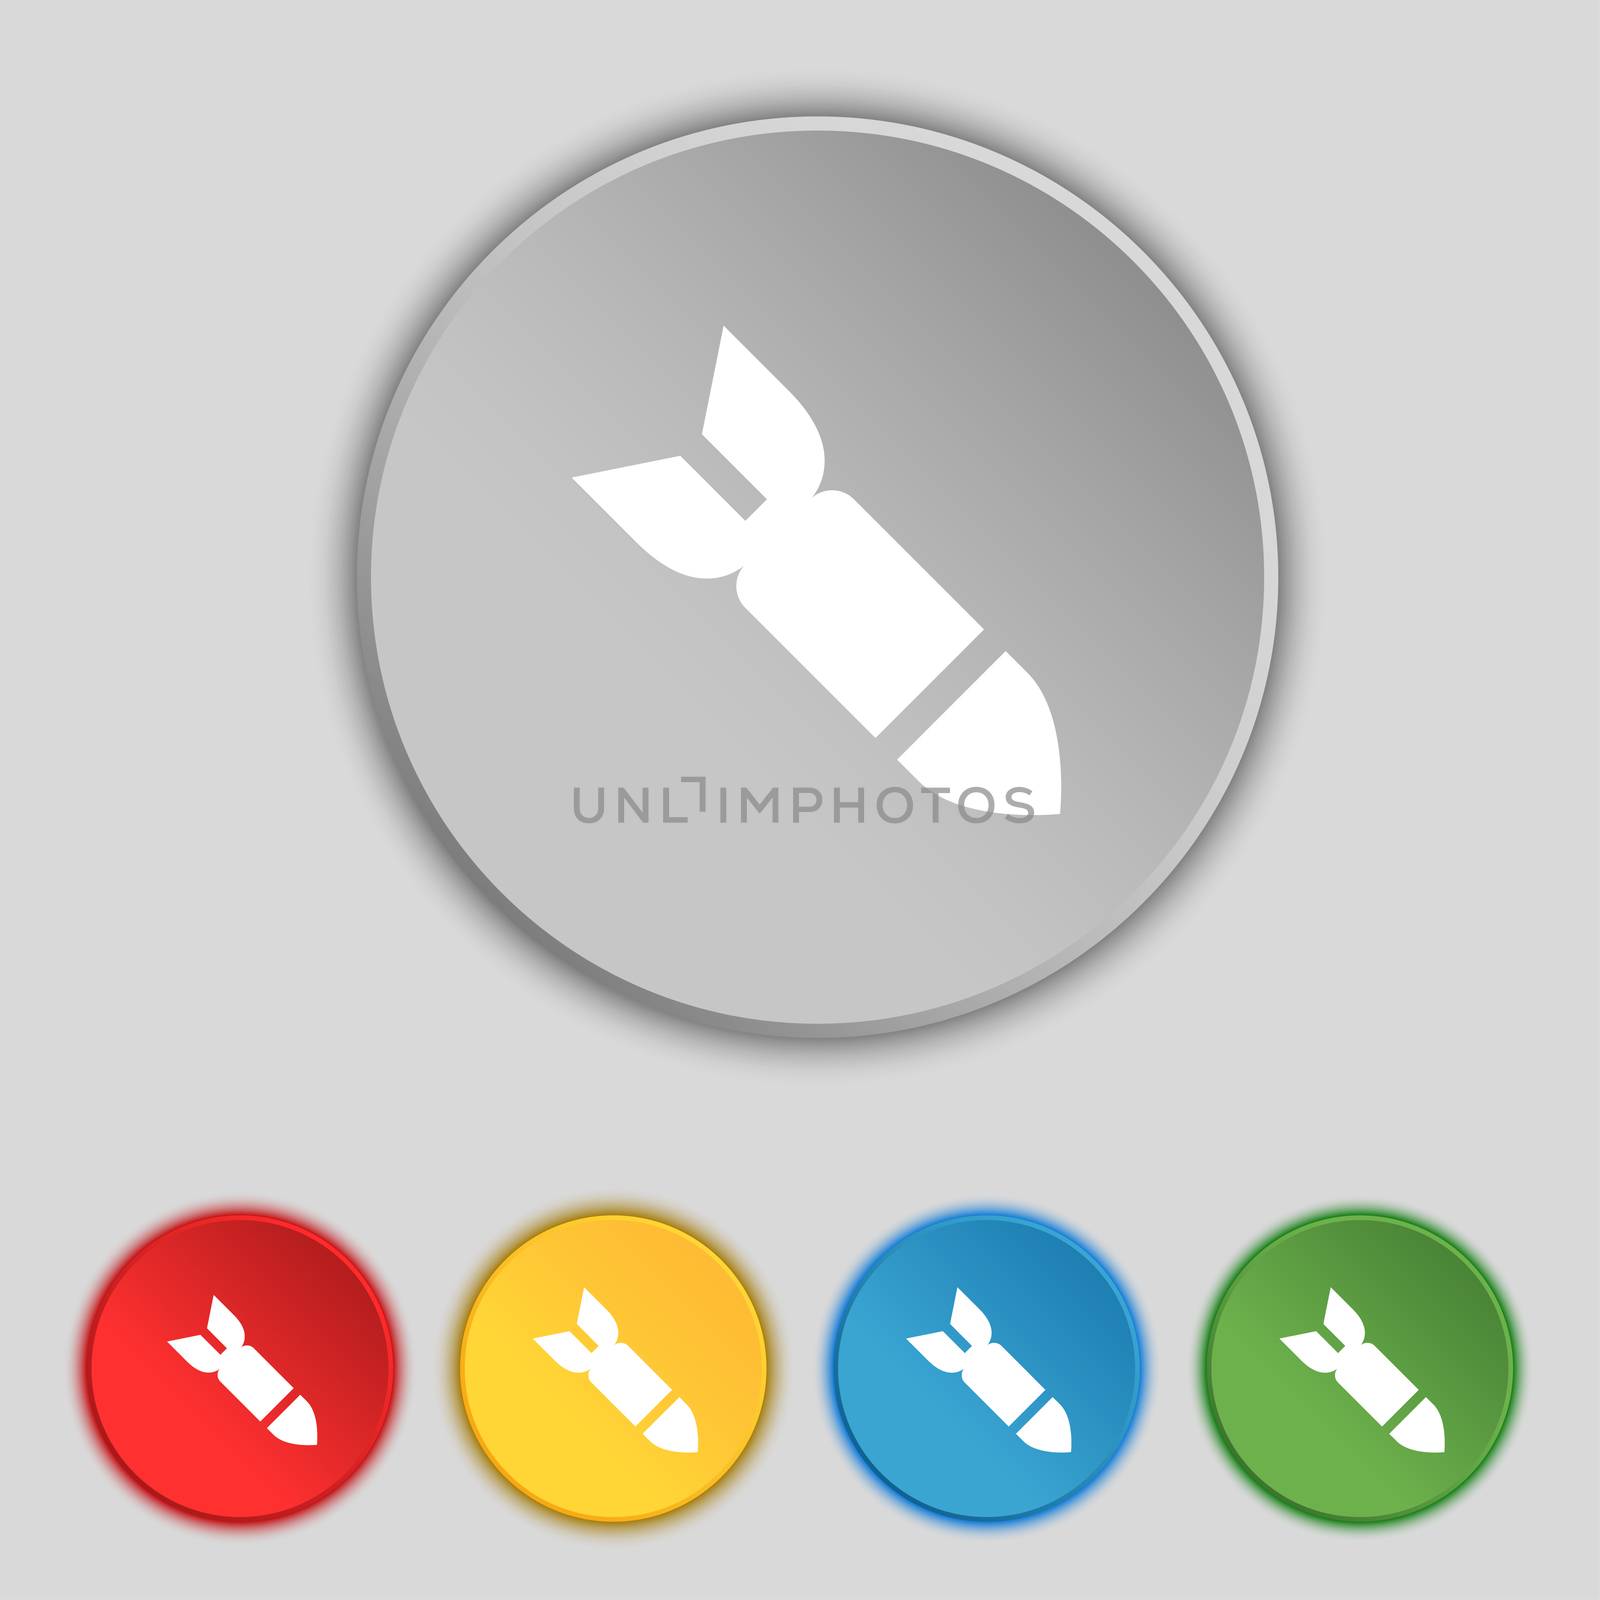 Missile,Rocket weapon icon sign. Symbol on five flat buttons. illustration